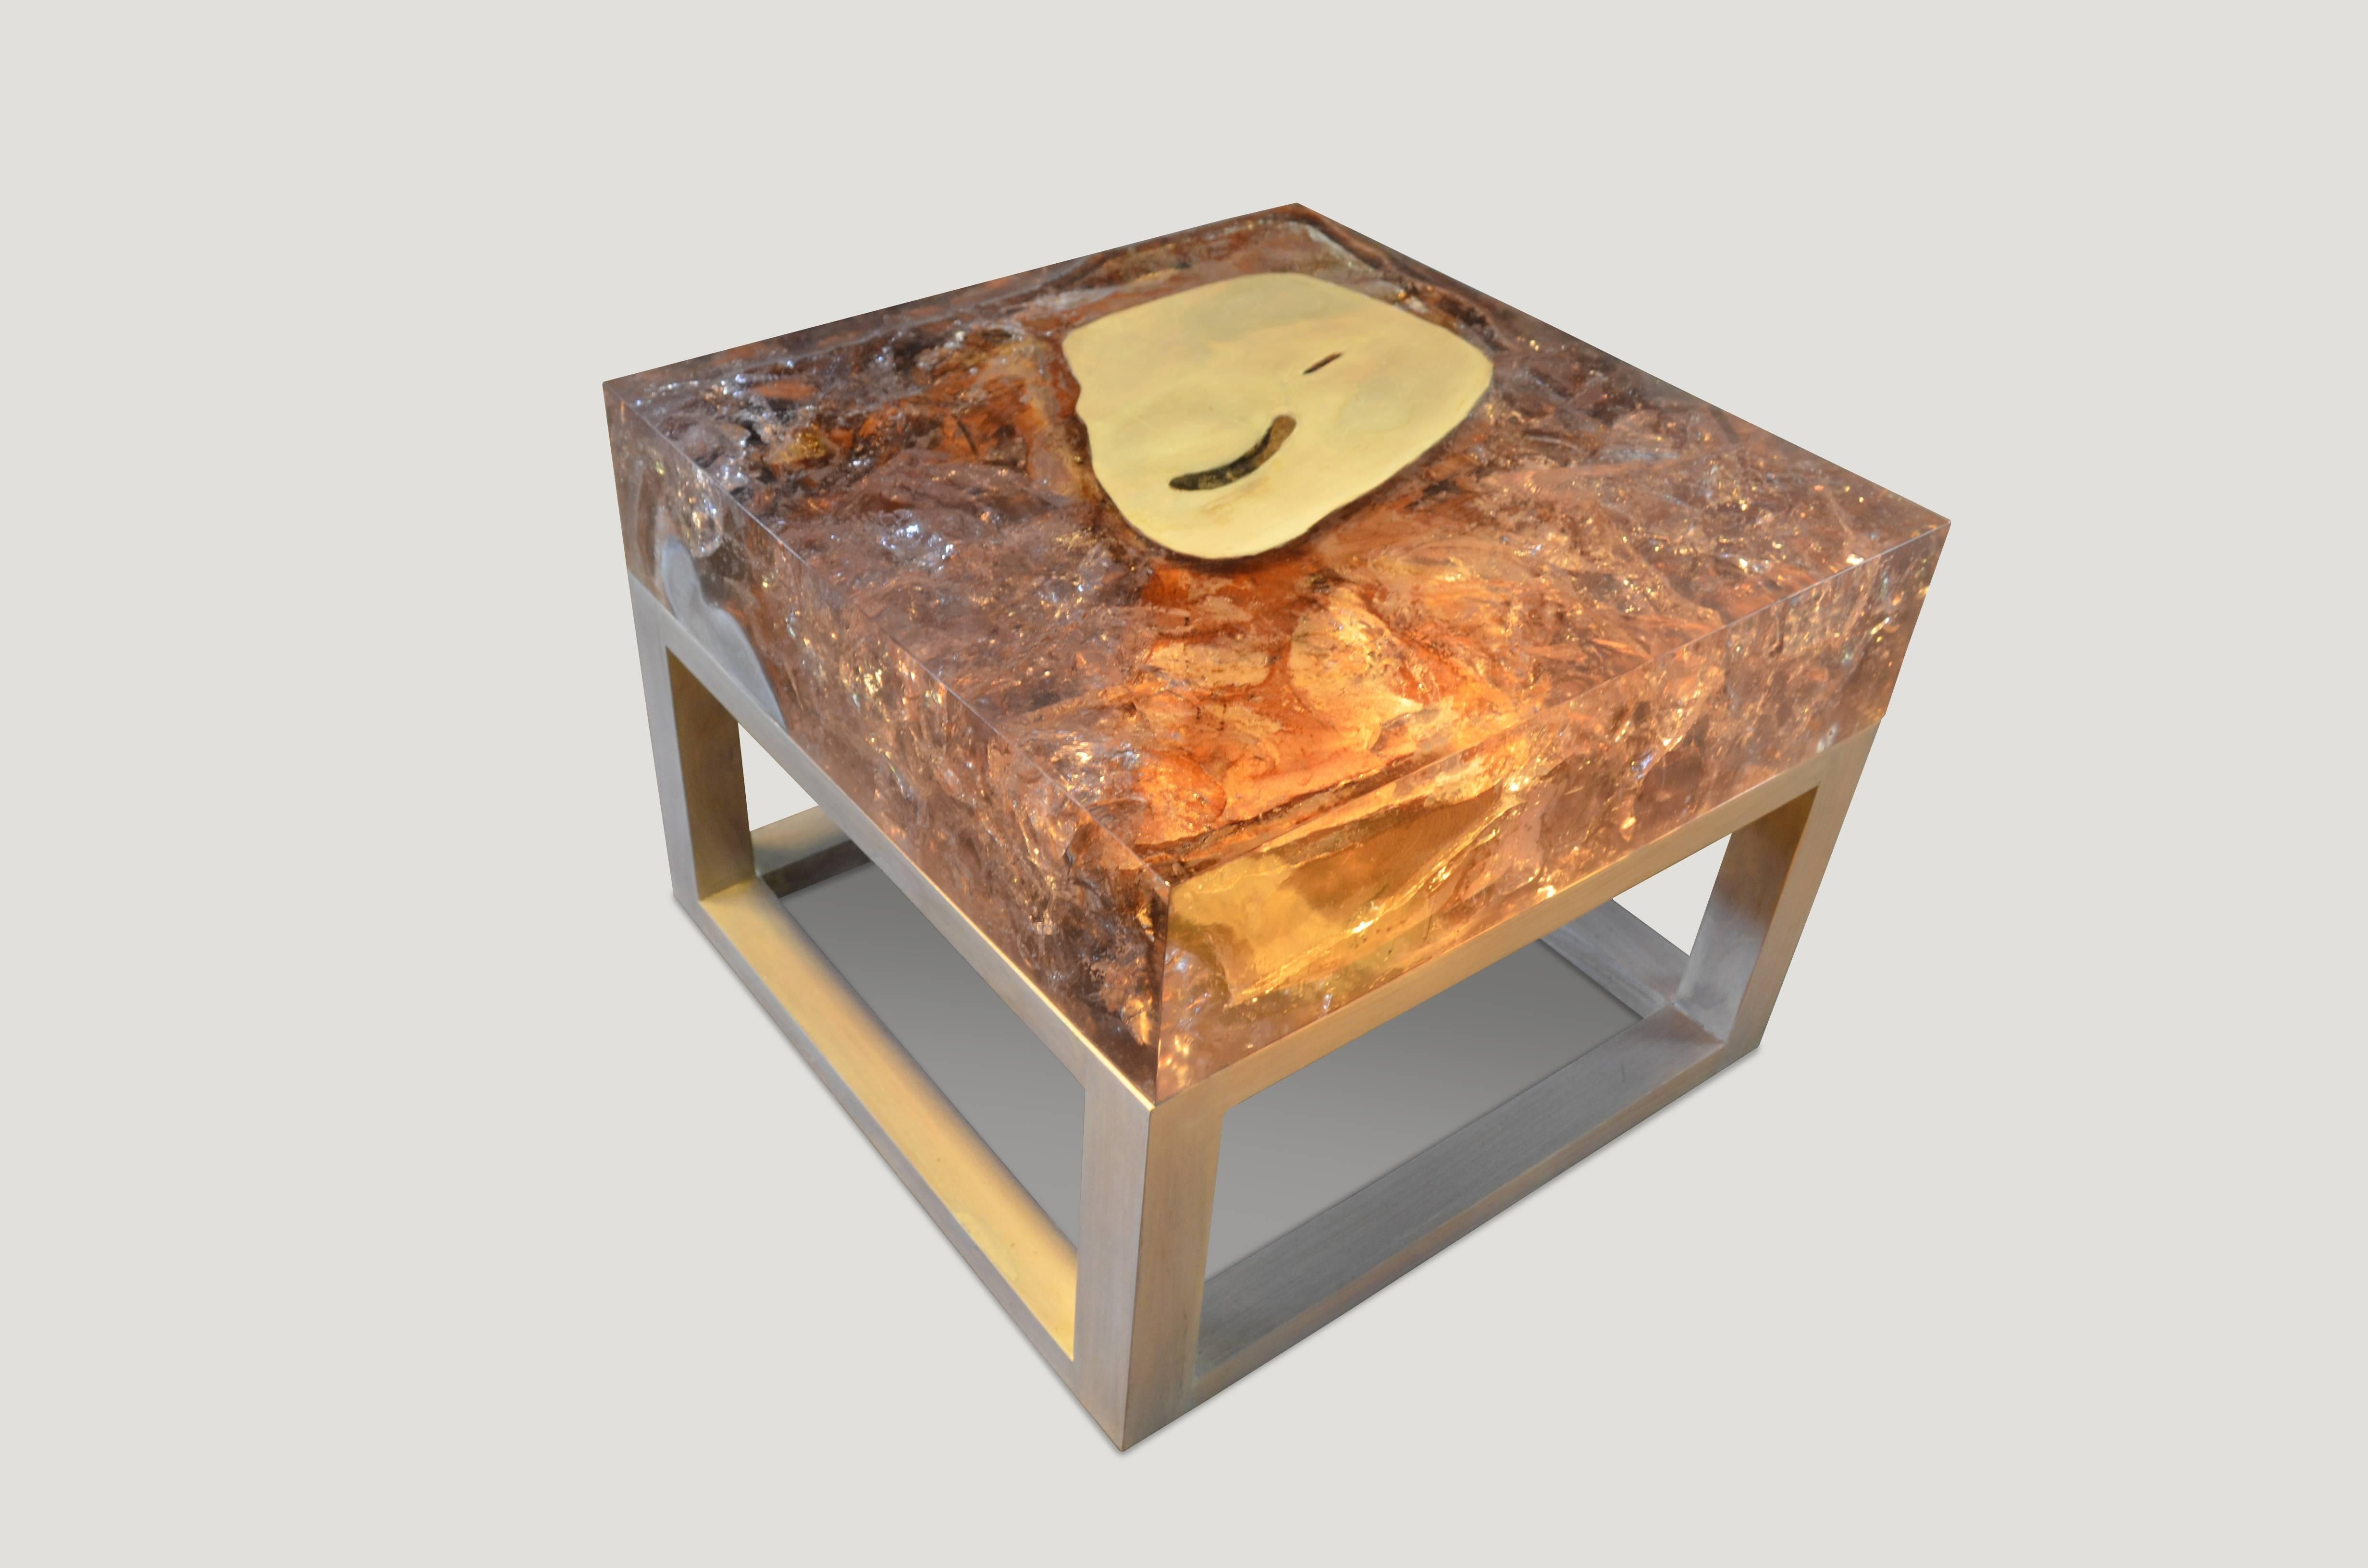 This cracked resin side table or coffee table is made from reclaimed teak infused with clear resin, which resembles a unique quartz crystal with many different facets, as shown here with gold, warm tones created naturally from the wood. Straight